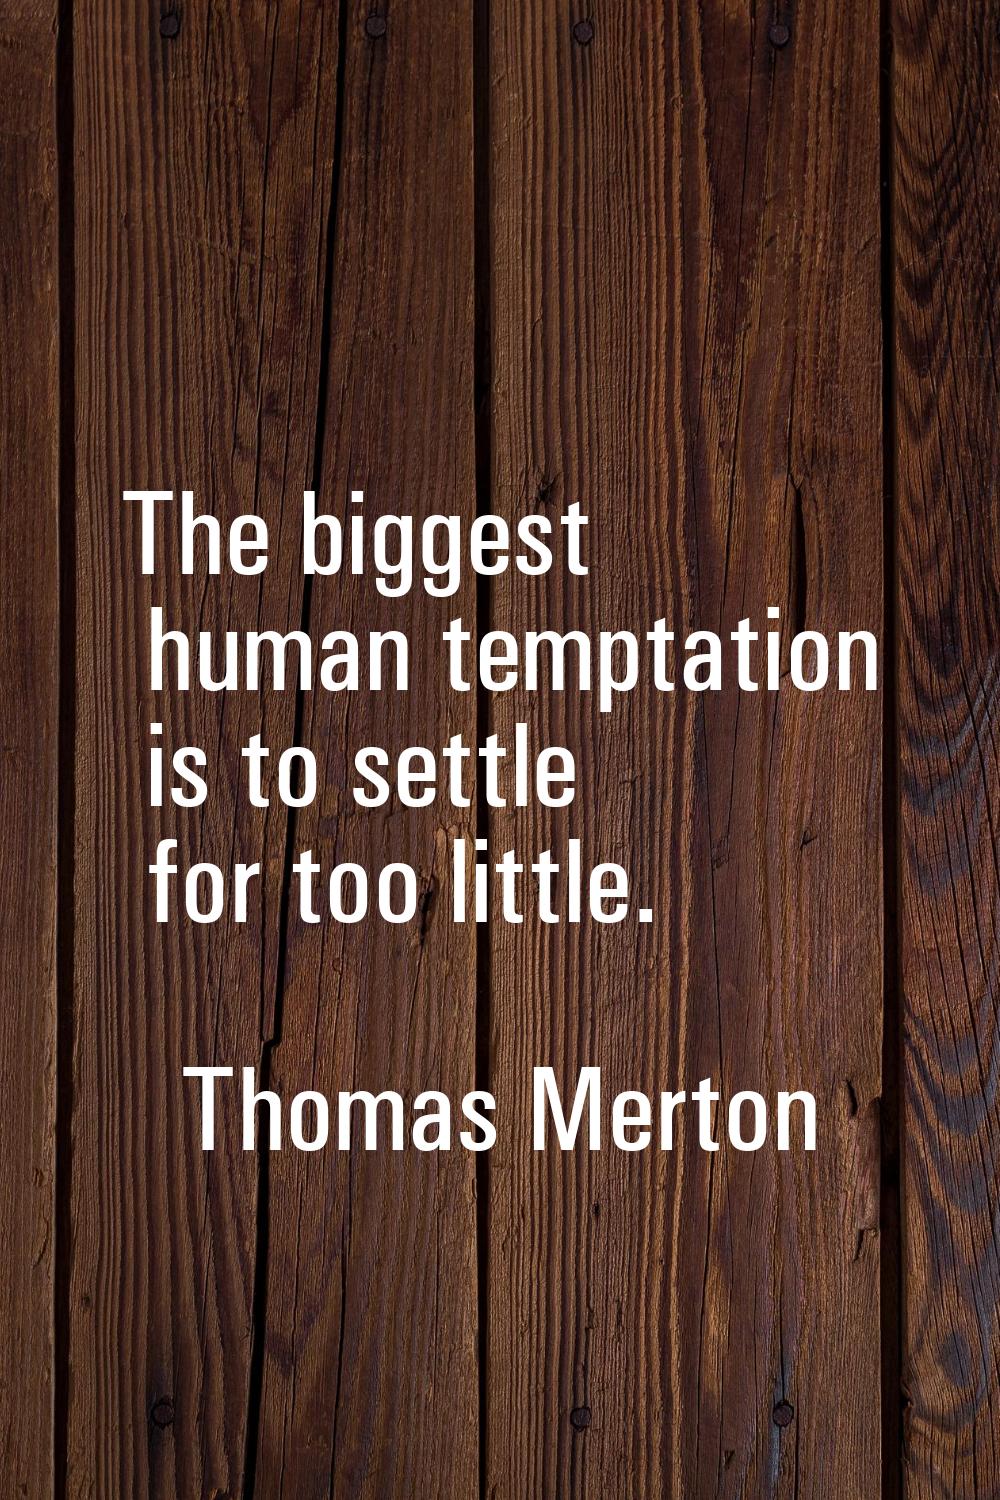 The biggest human temptation is to settle for too little.